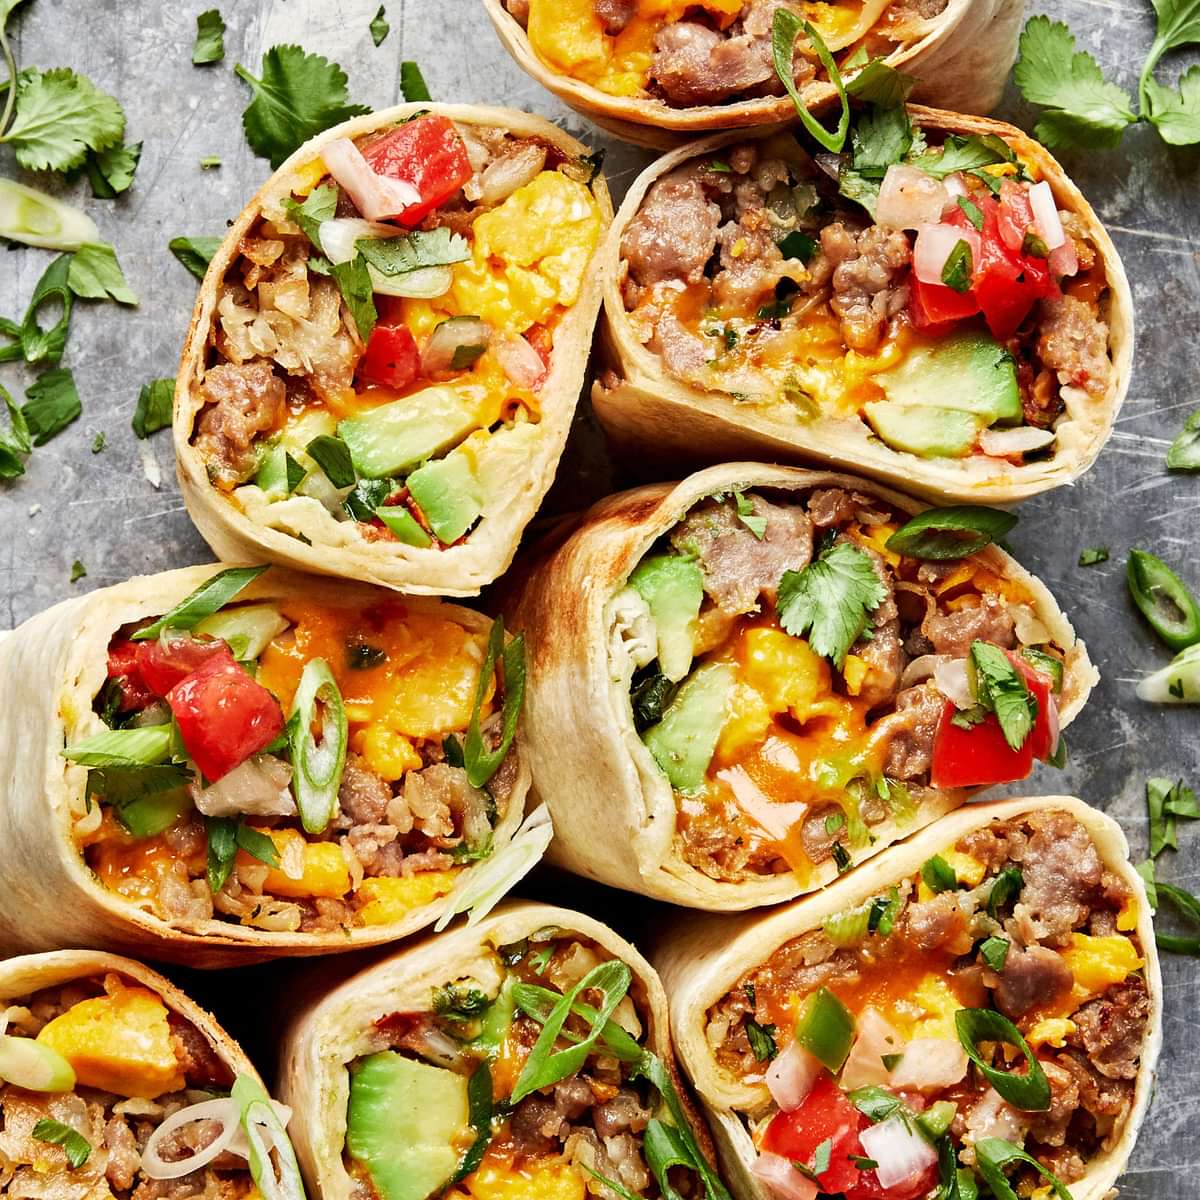 breakfast burritos sliced in half filled with potatoes, eggs, sausage, green onions, cheddar, avocado, salsa and cilantro